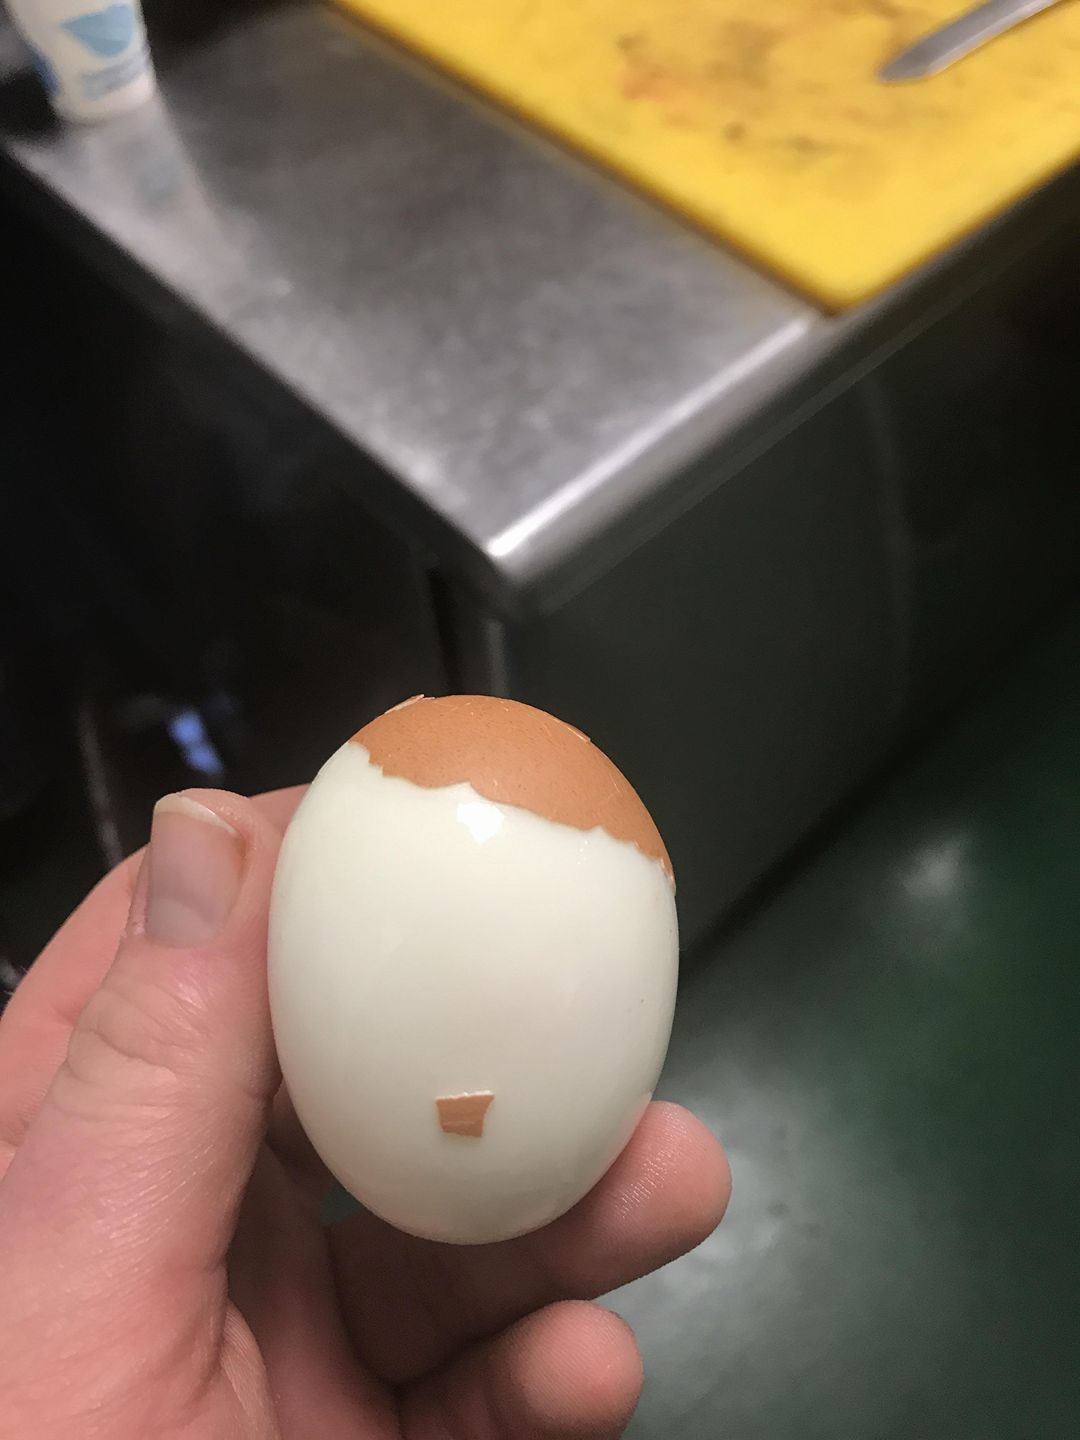 The perfect egg doesn't eggx-